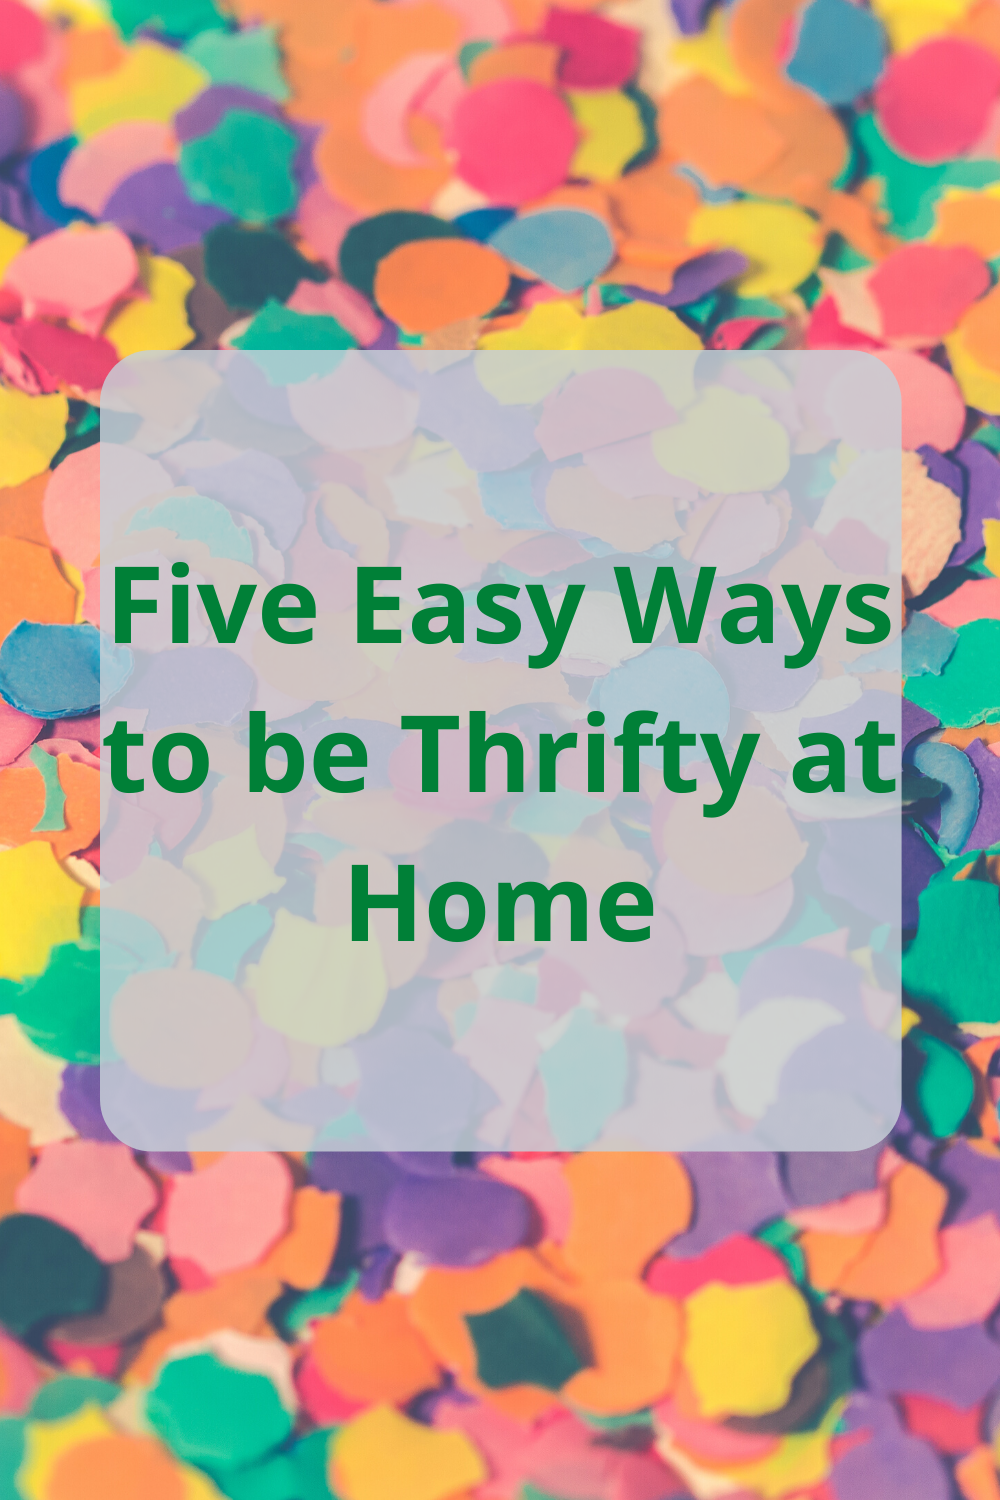 Five Easy Ways to be Thrifty at Home